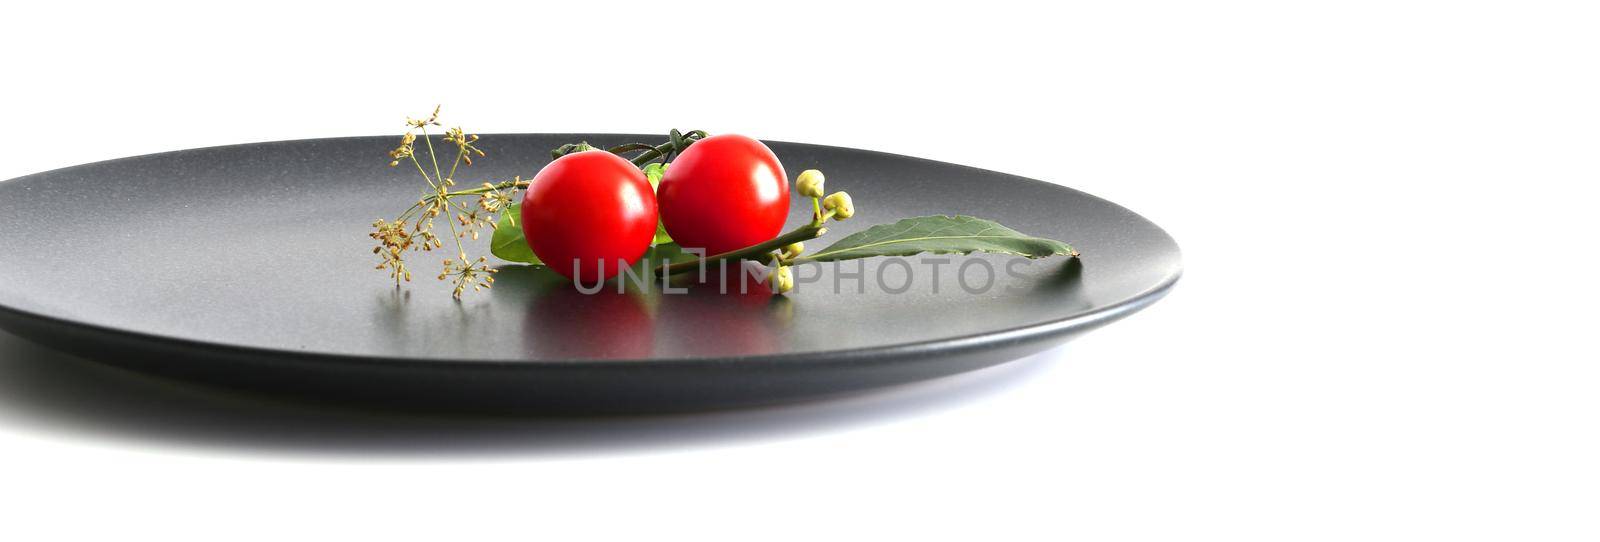 Table arrangemnt with tomato by NelliPolk